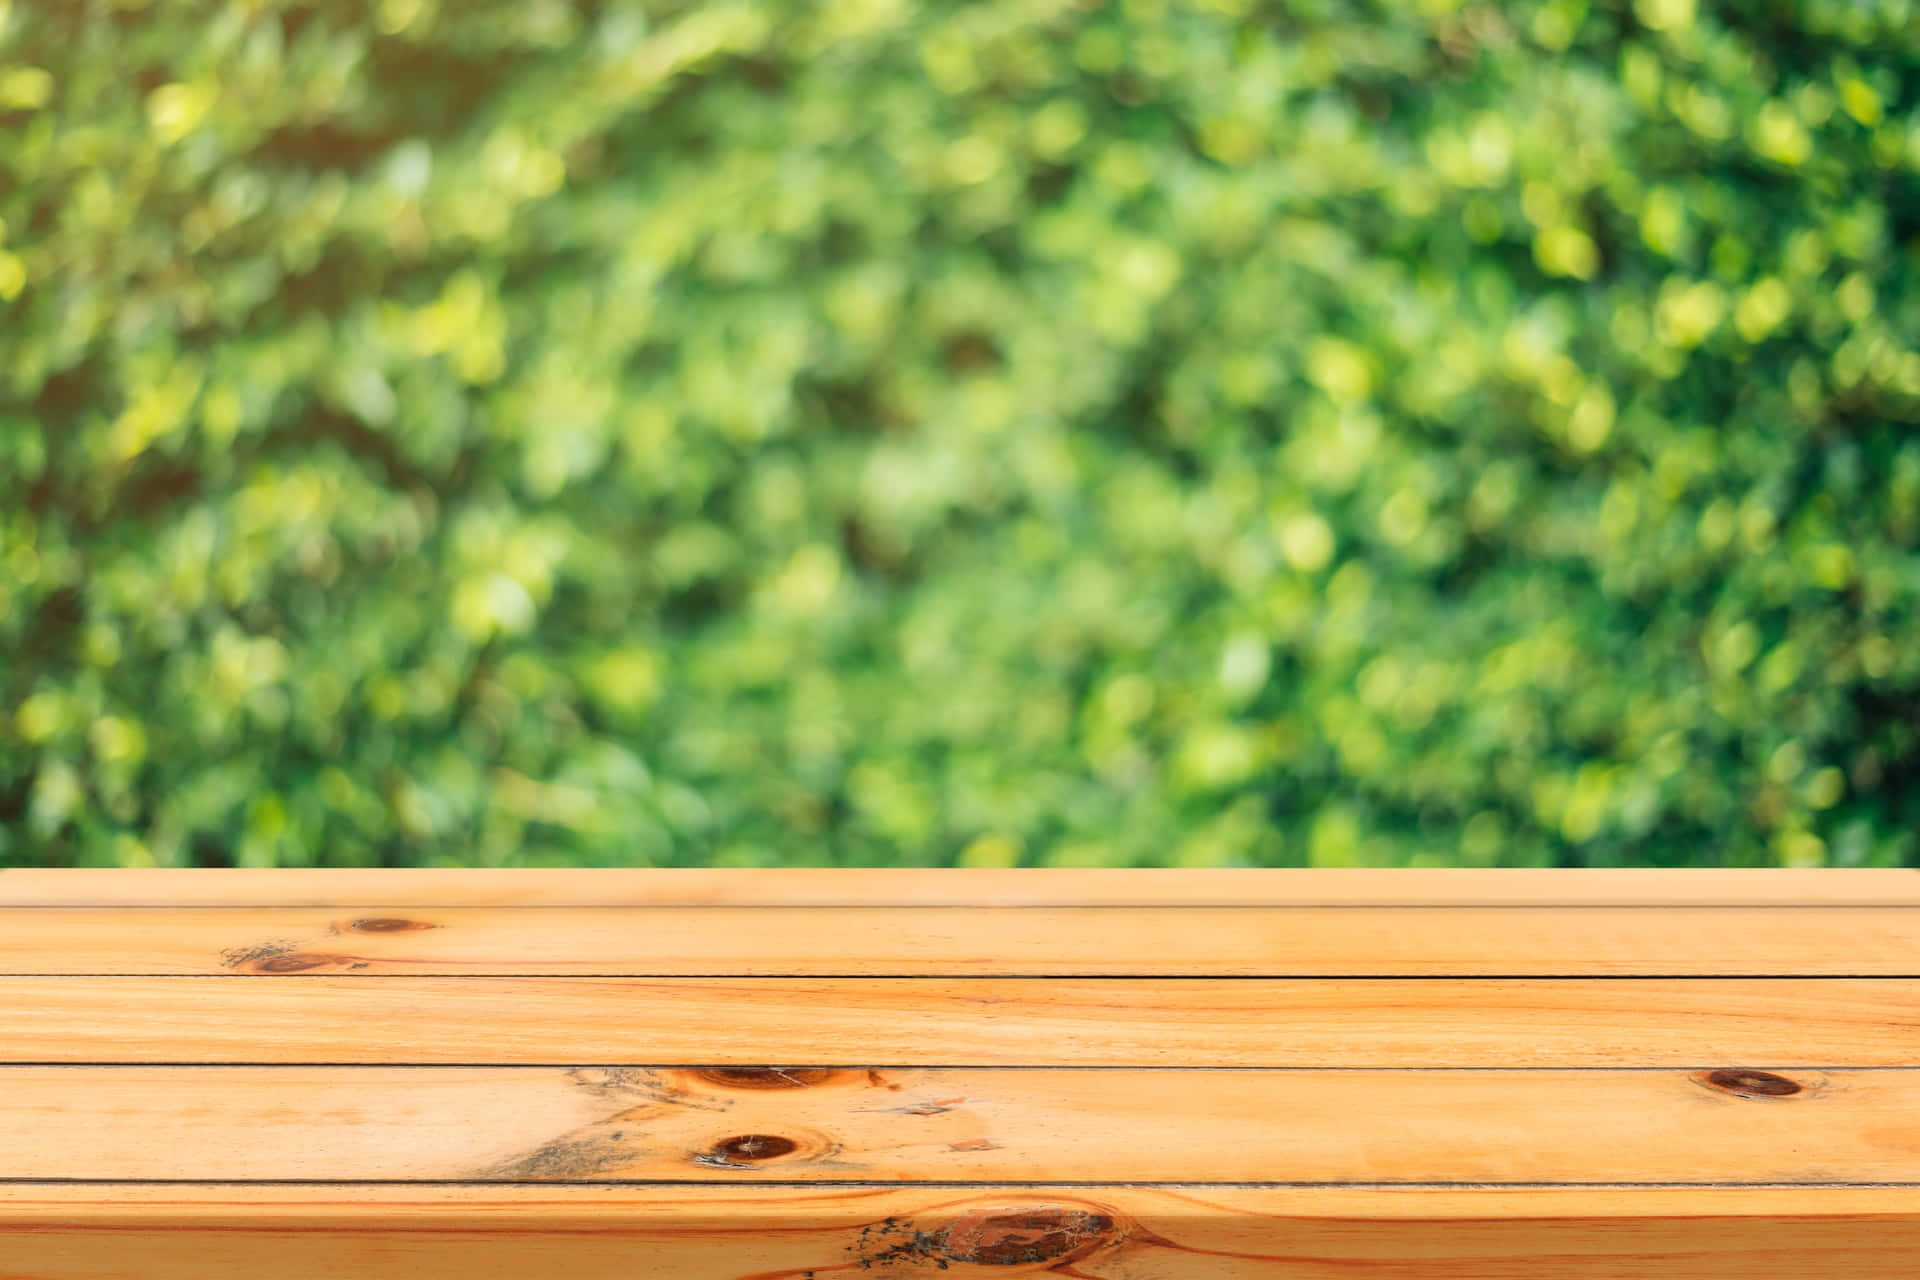 Wooden Table On A Green Background